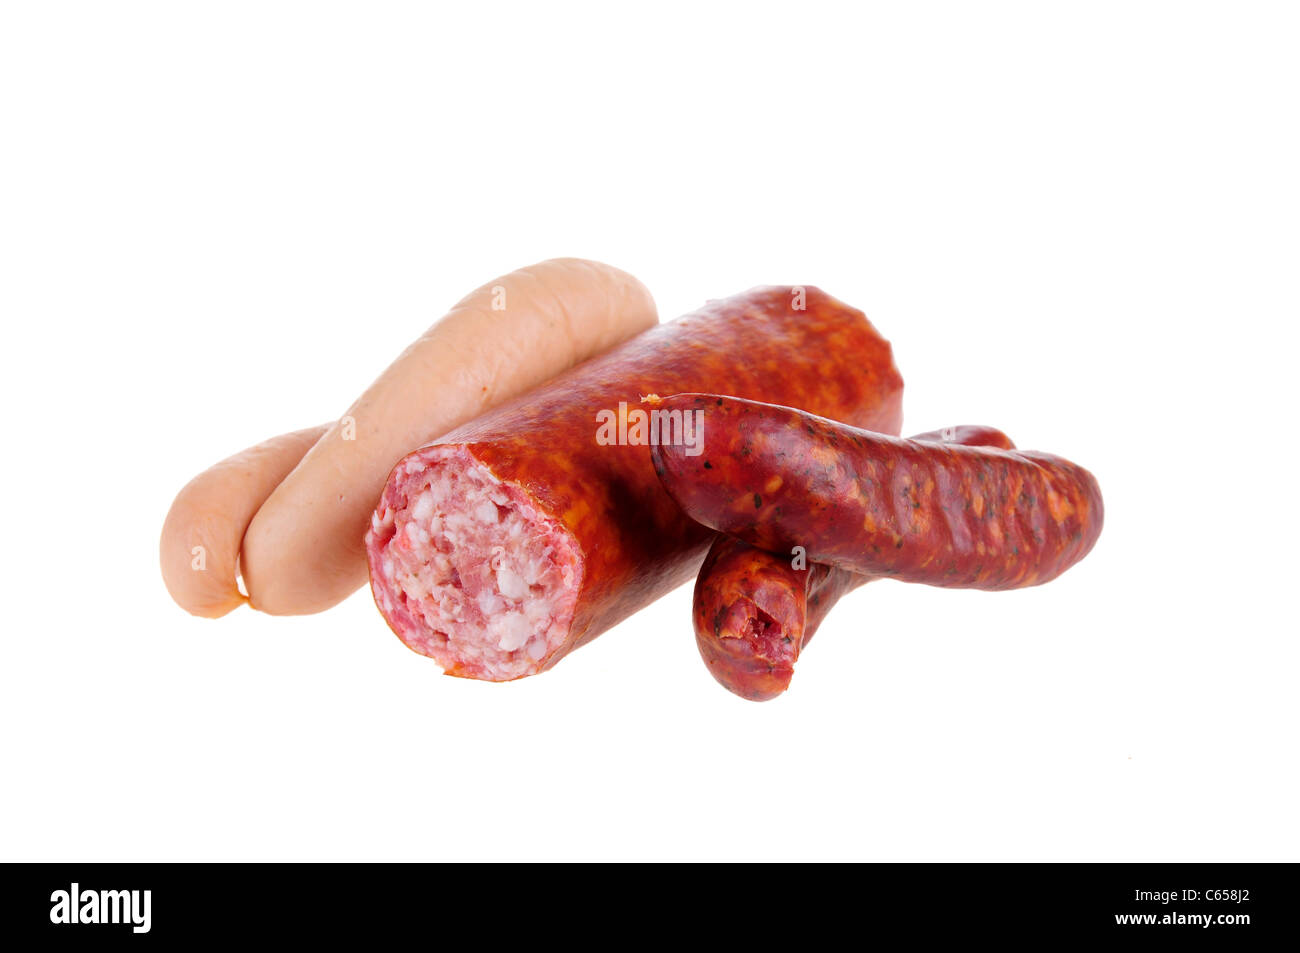 Sausage isolated on the white background. Stock Photo